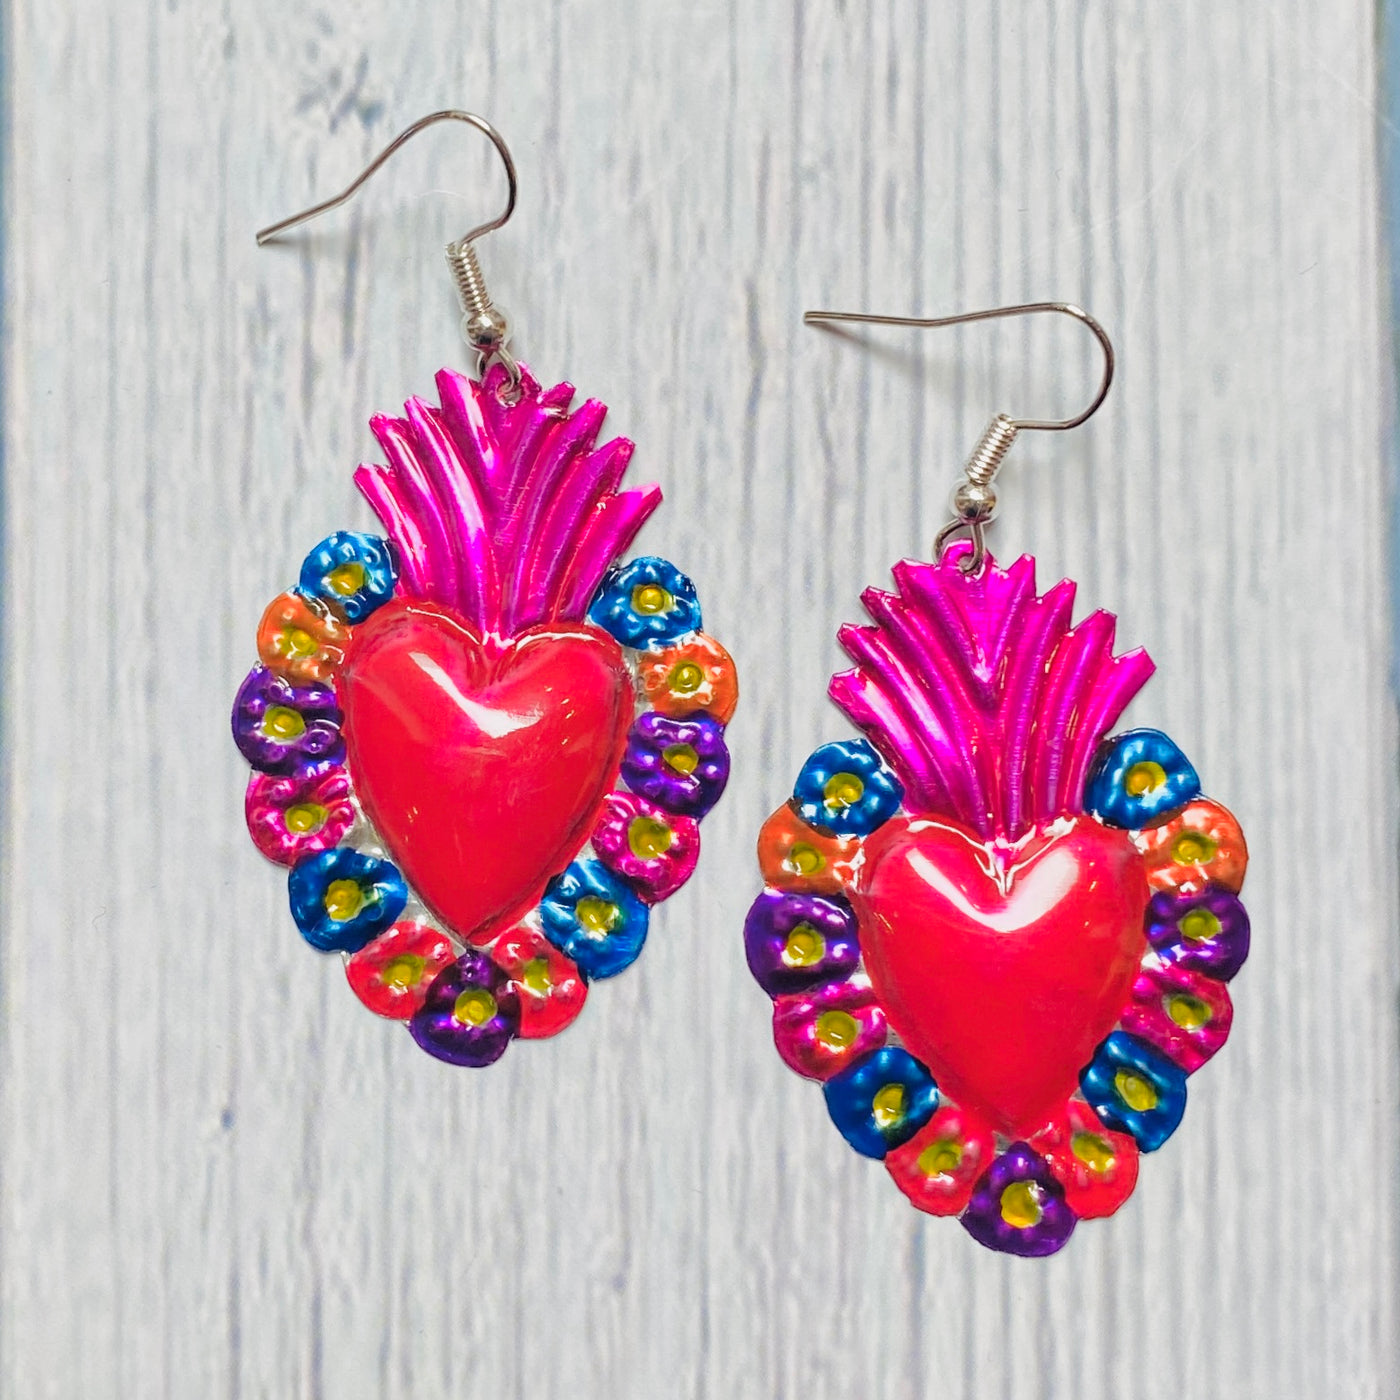 Colorful tin sacred heart earrings with flowers around the heart.